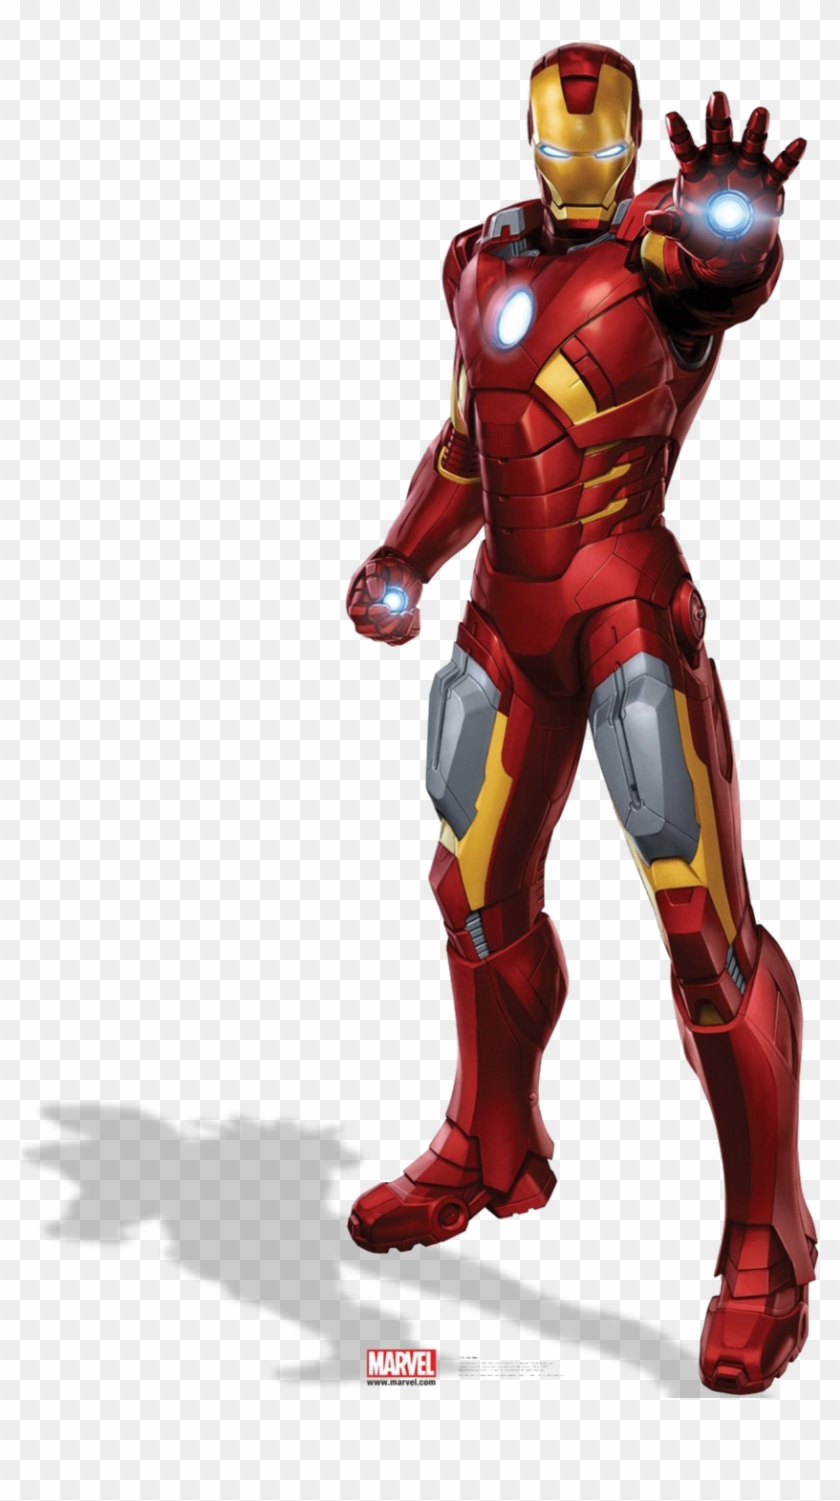 Iron Man Png Hd Clipart 20   PikPng